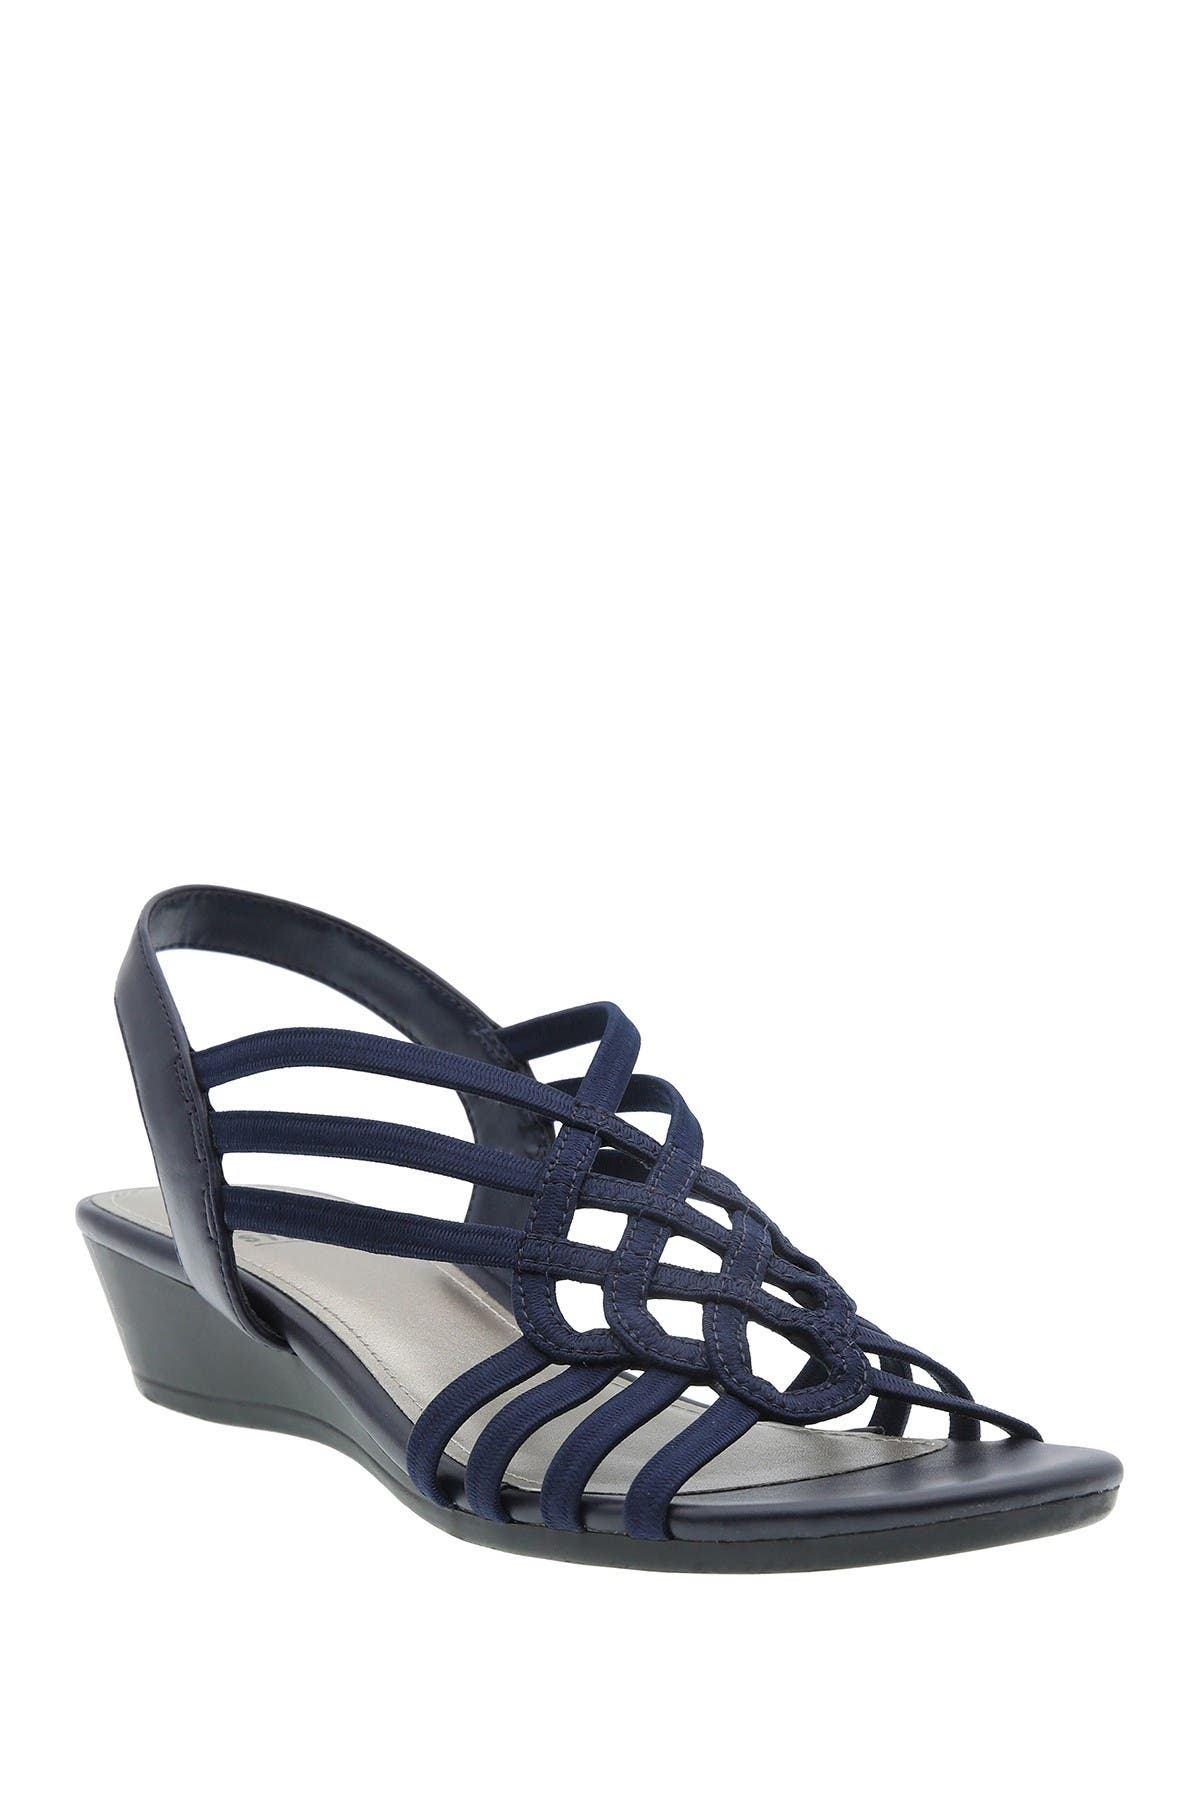 Impo Roma Stretch Wedge Sandal In Navy